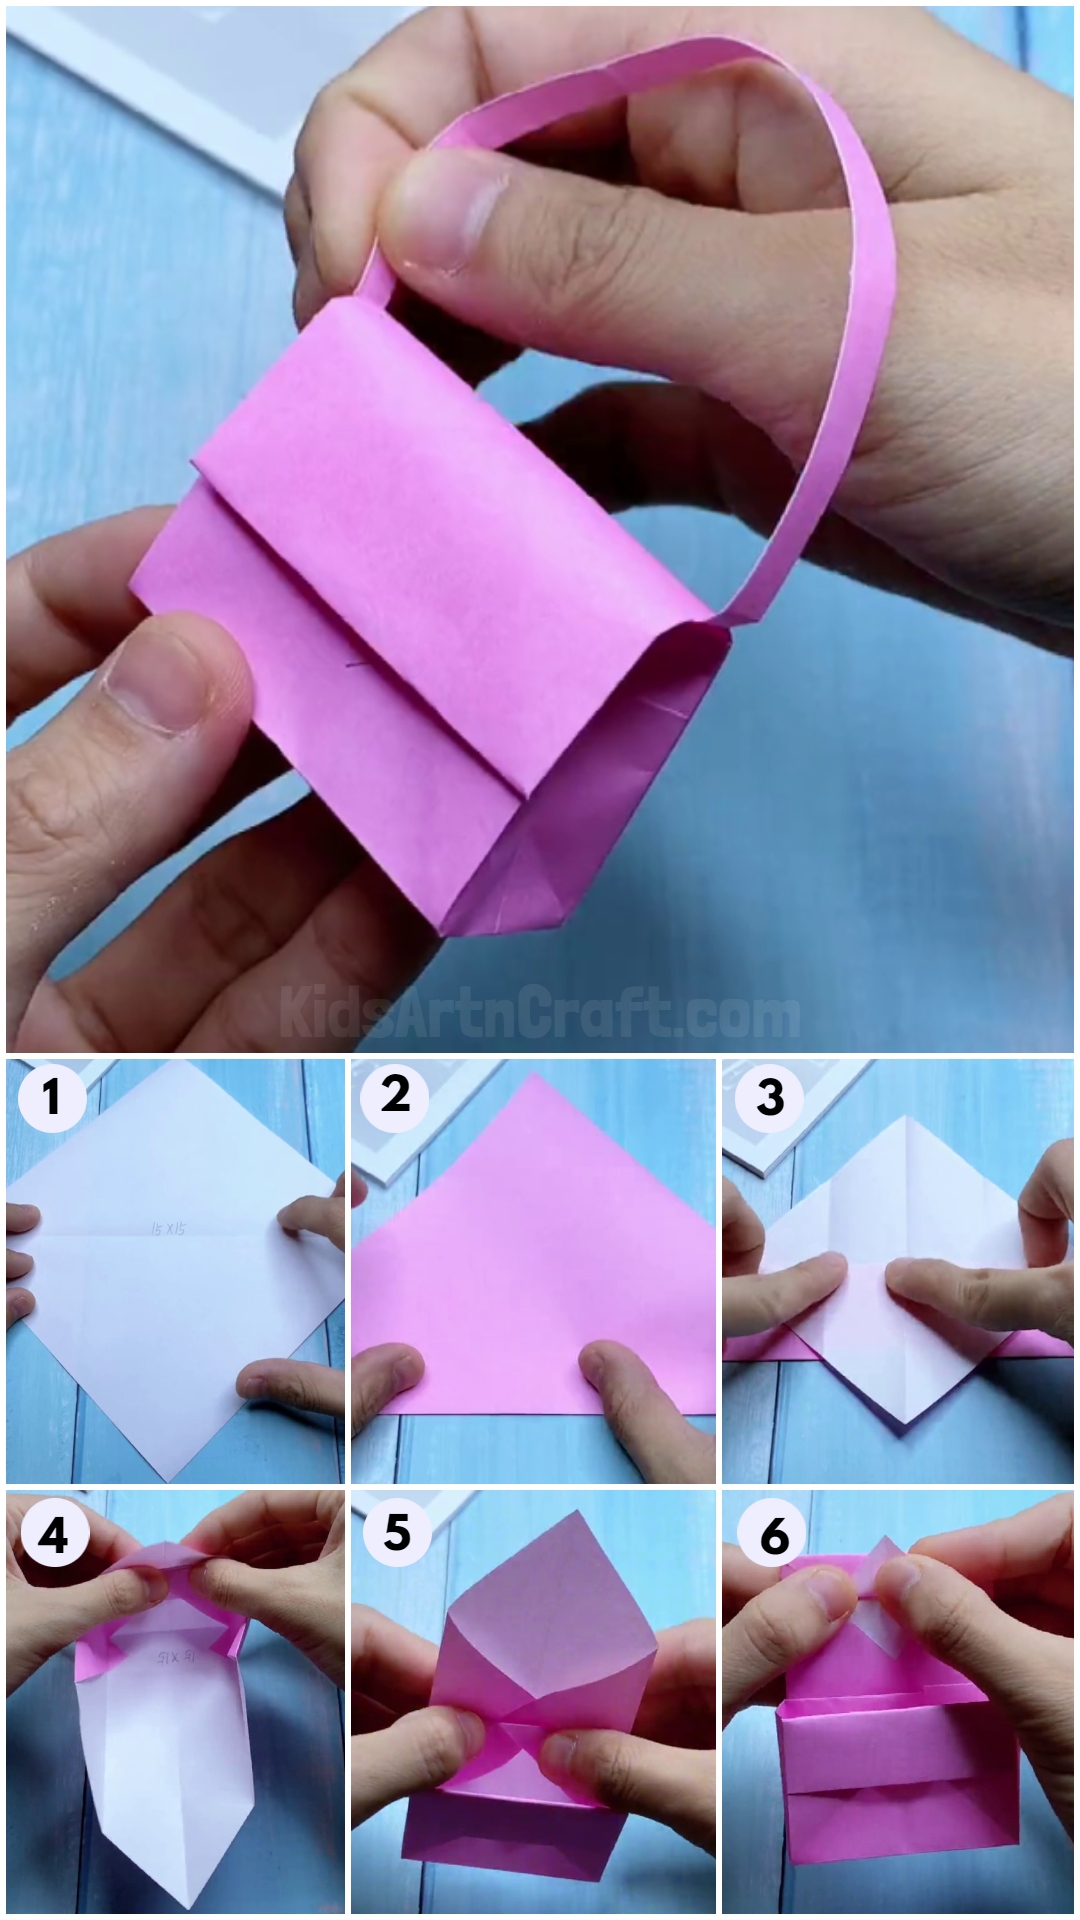 how to make mini origami paper bag for kids FS Step By Step kidsartncraft 3